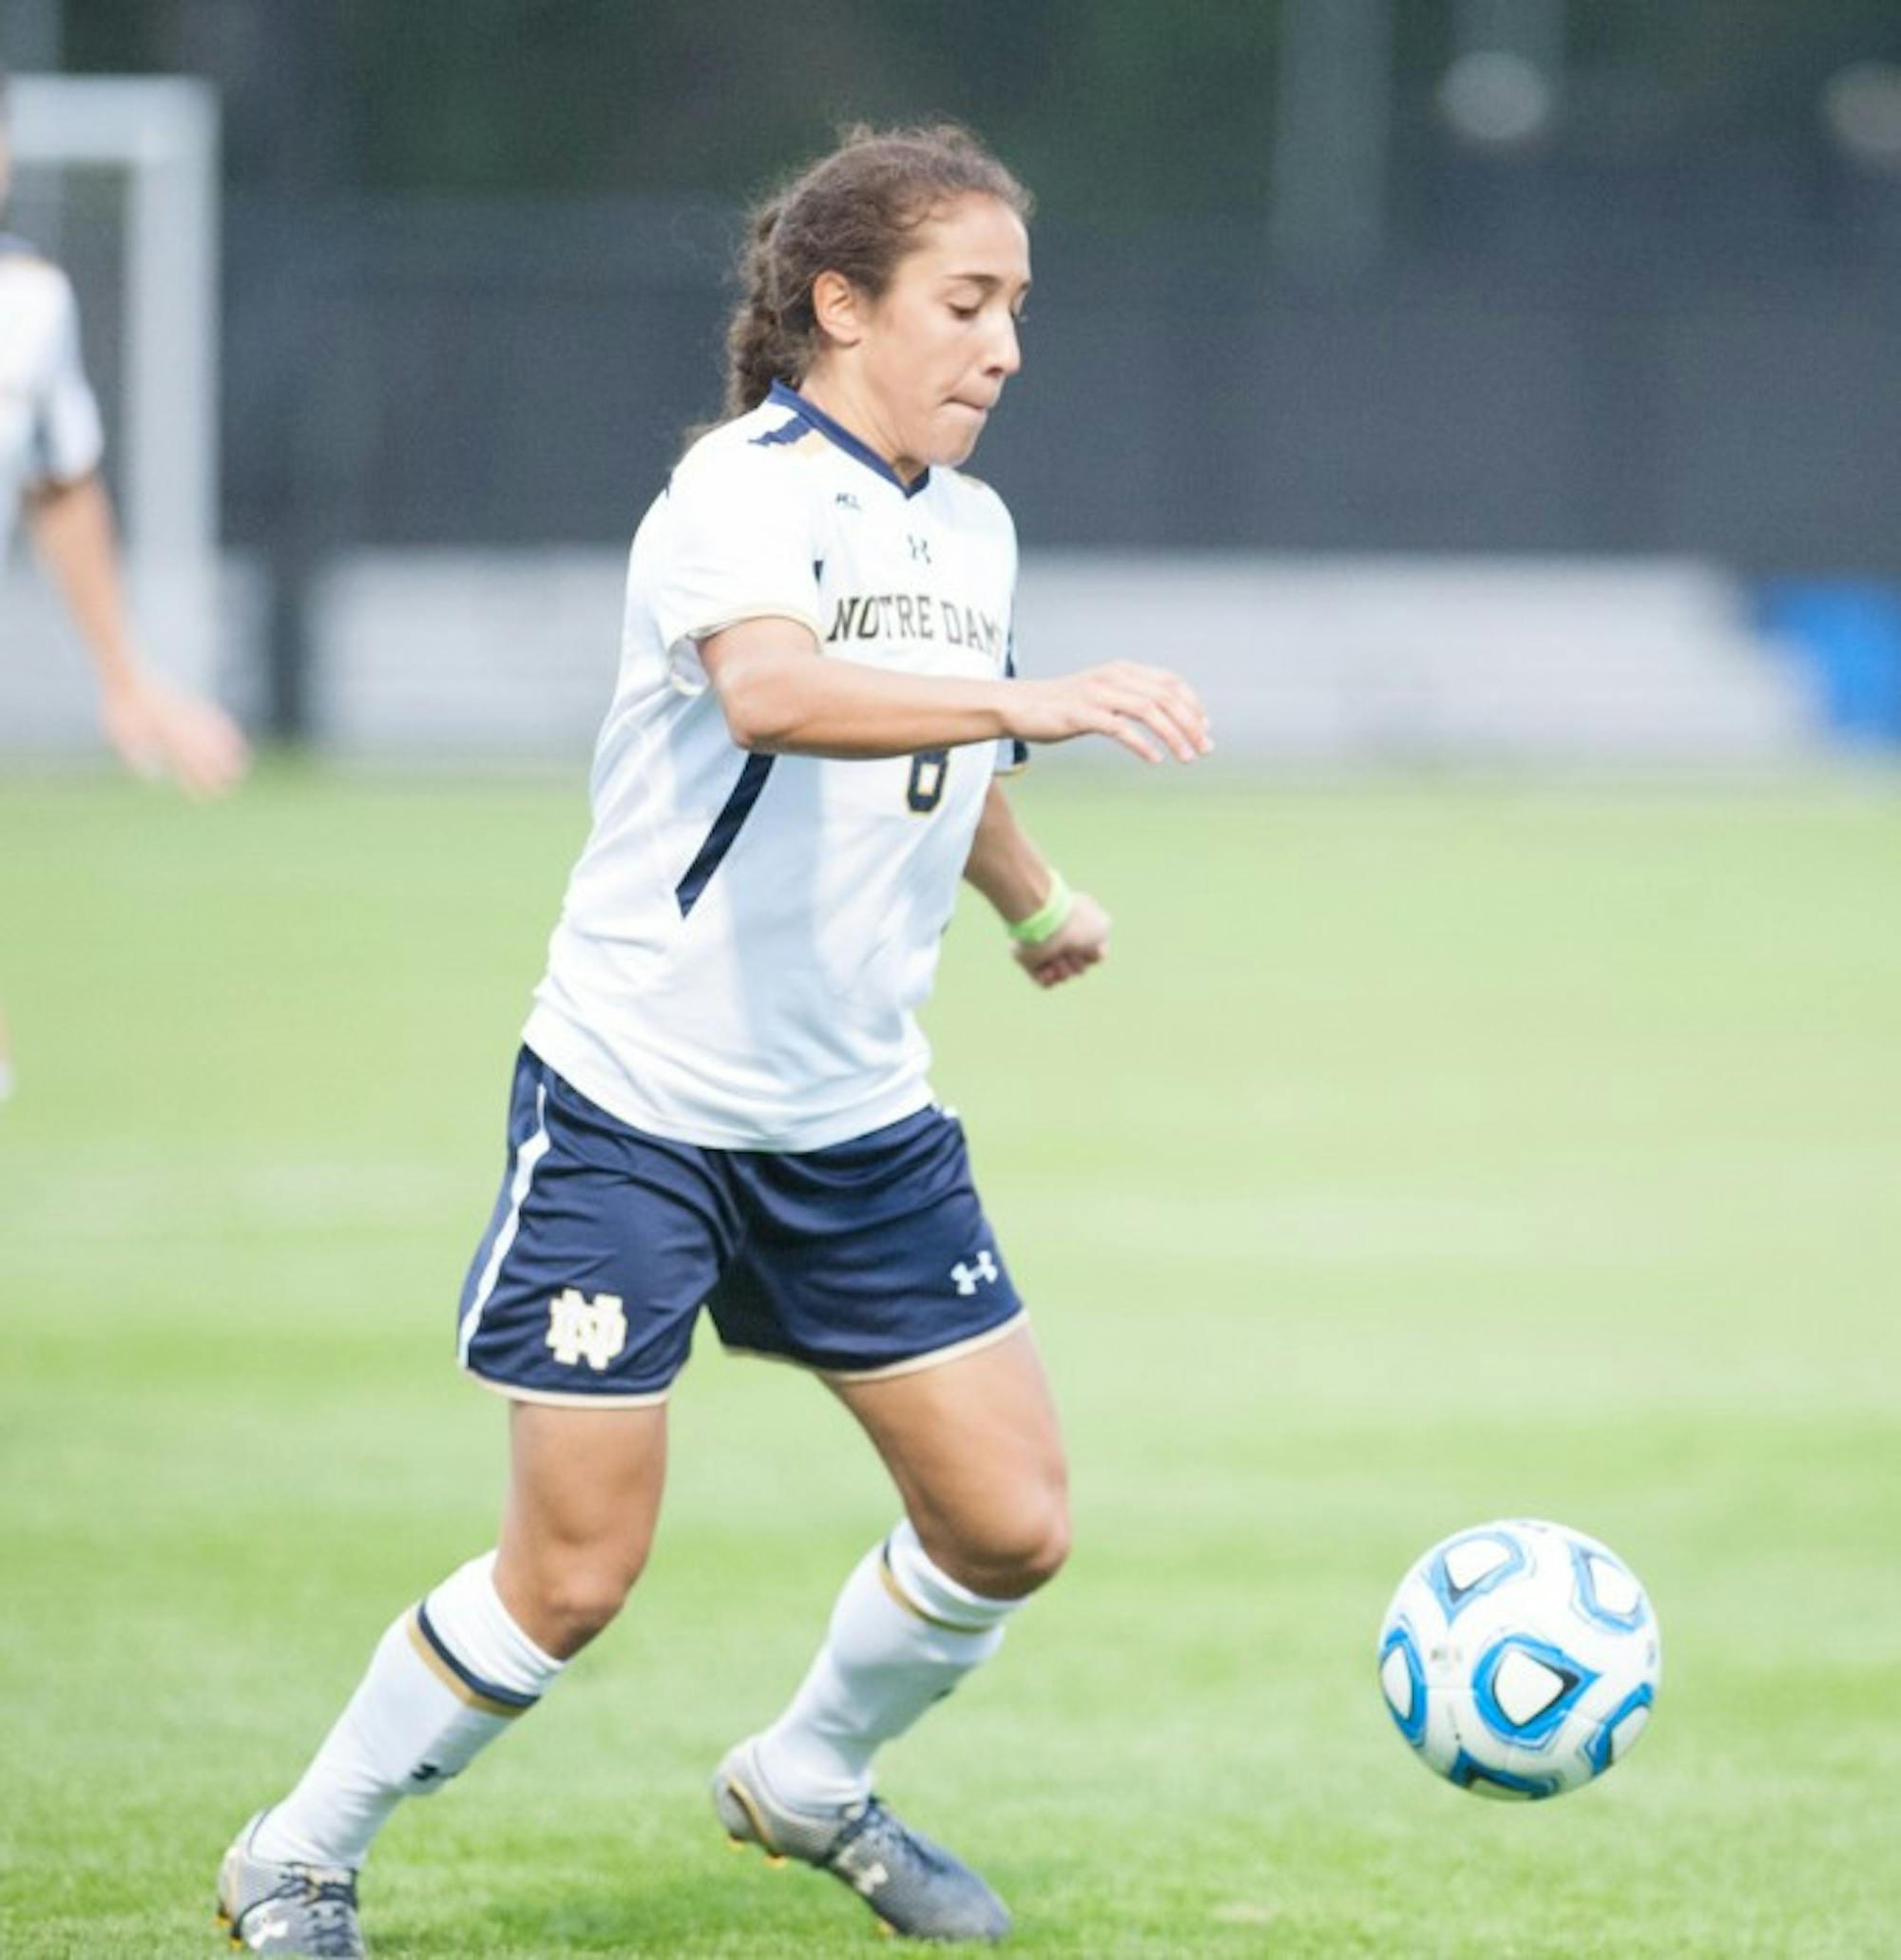 Irish freshman defender Sabrina Flores corrals the ball during Notre Dame's 1-0 victory over Baylor on Sept. 12.